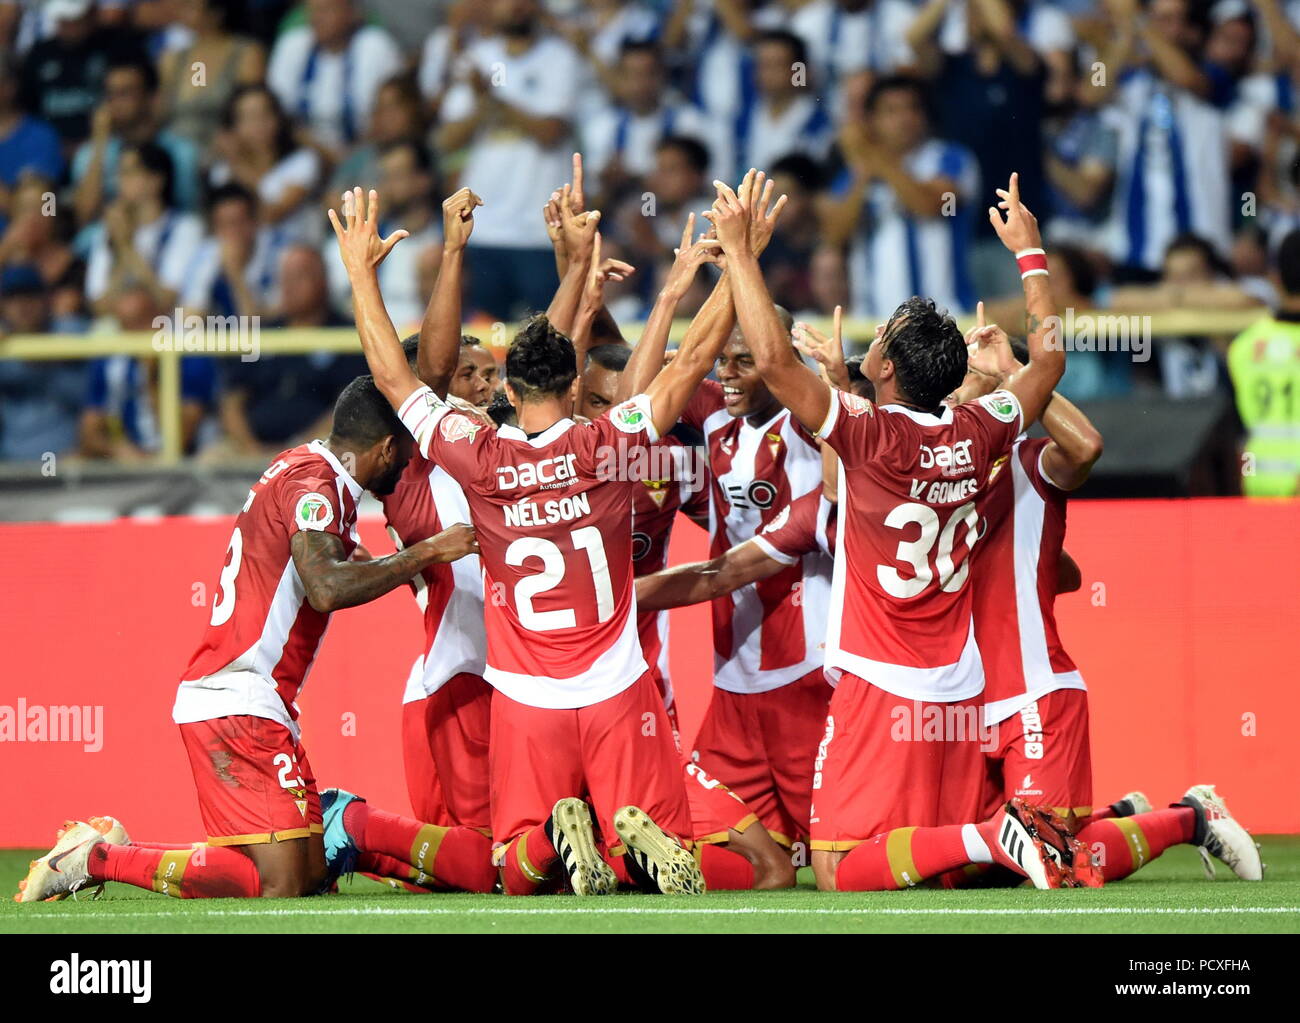 Aveiro, Portugal. 4th Aug, 2018. Players of Aves celebrate a goal during  the Portuguese Super Cup soccer match between SL Benfica and CD Aves at the  Aveiro Municiapl Stadium in Aveiro on